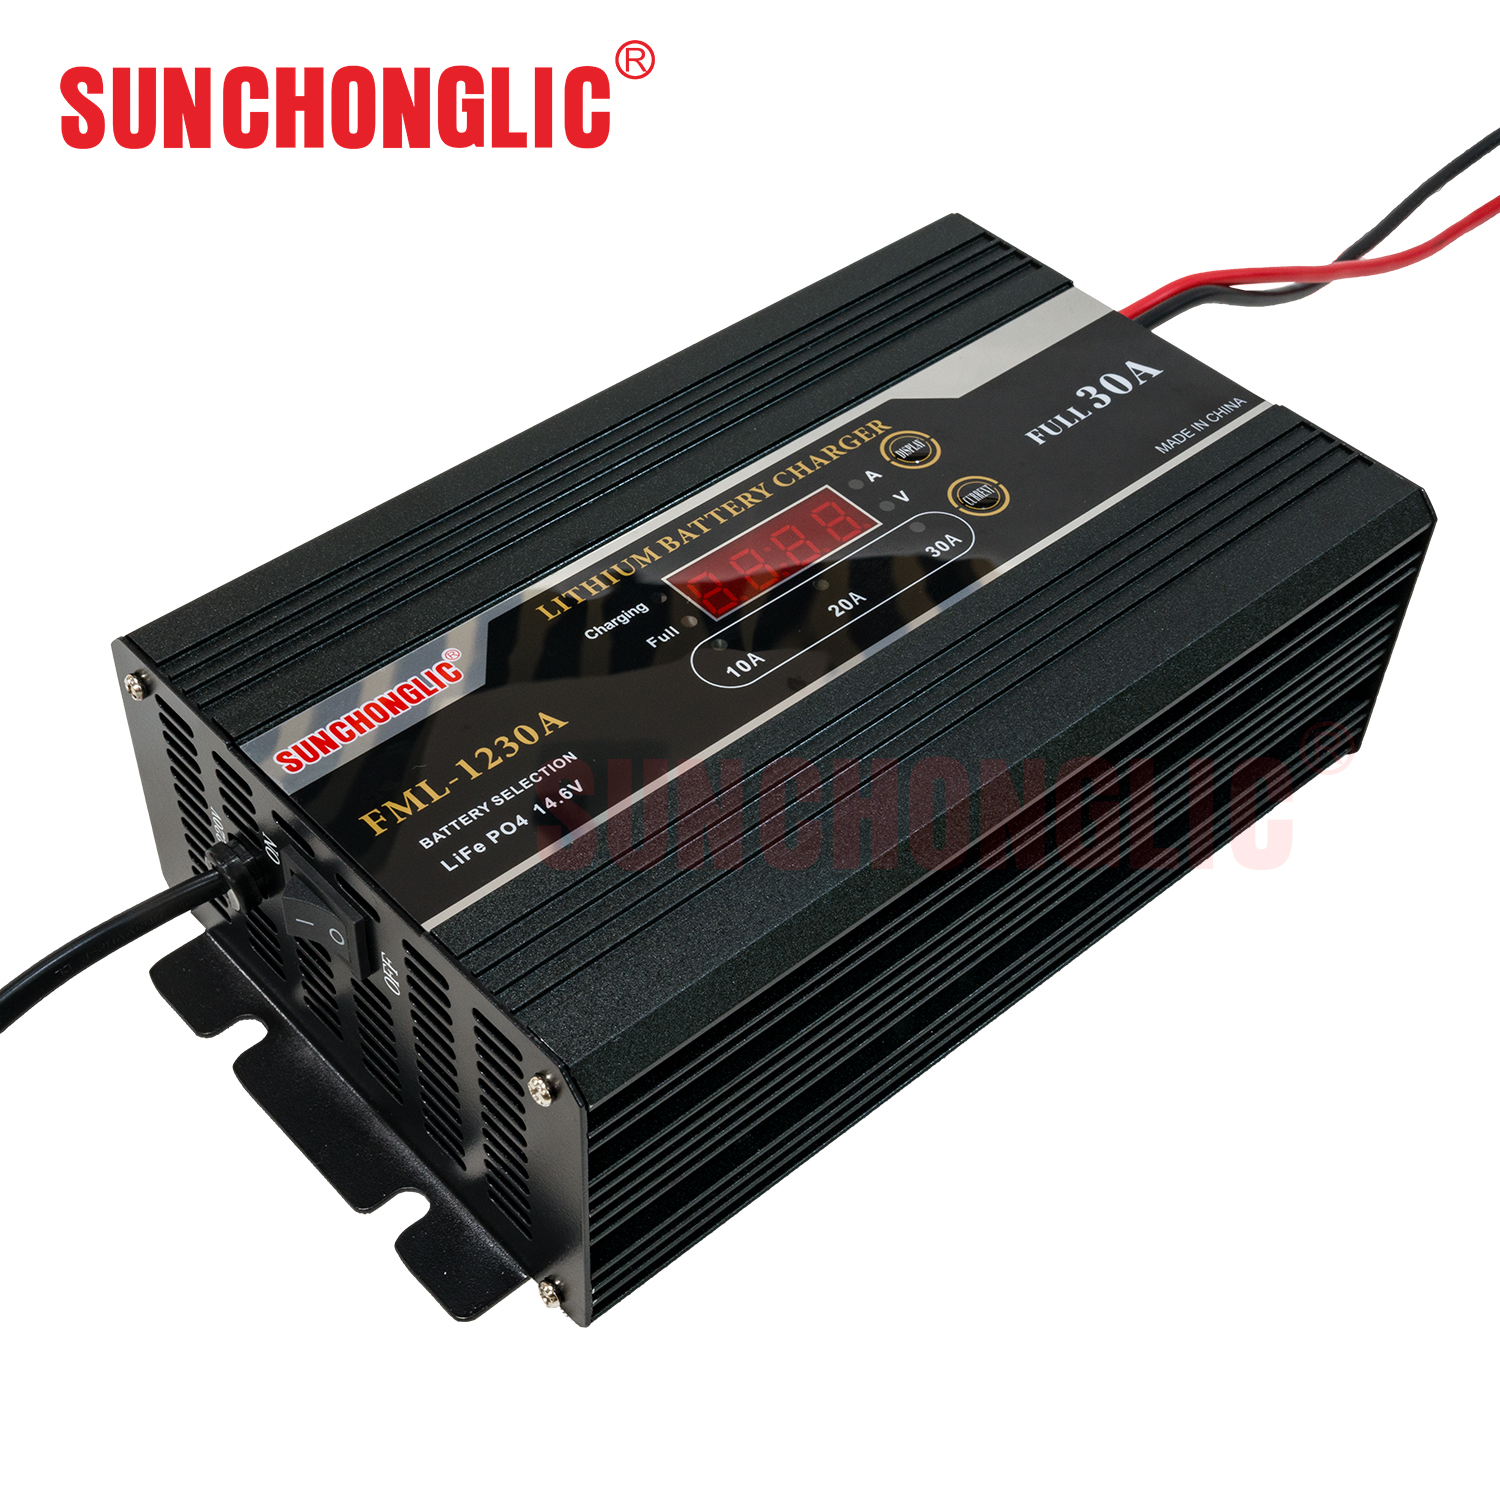 12V 30A smart LiFePO4 lithium battery charger